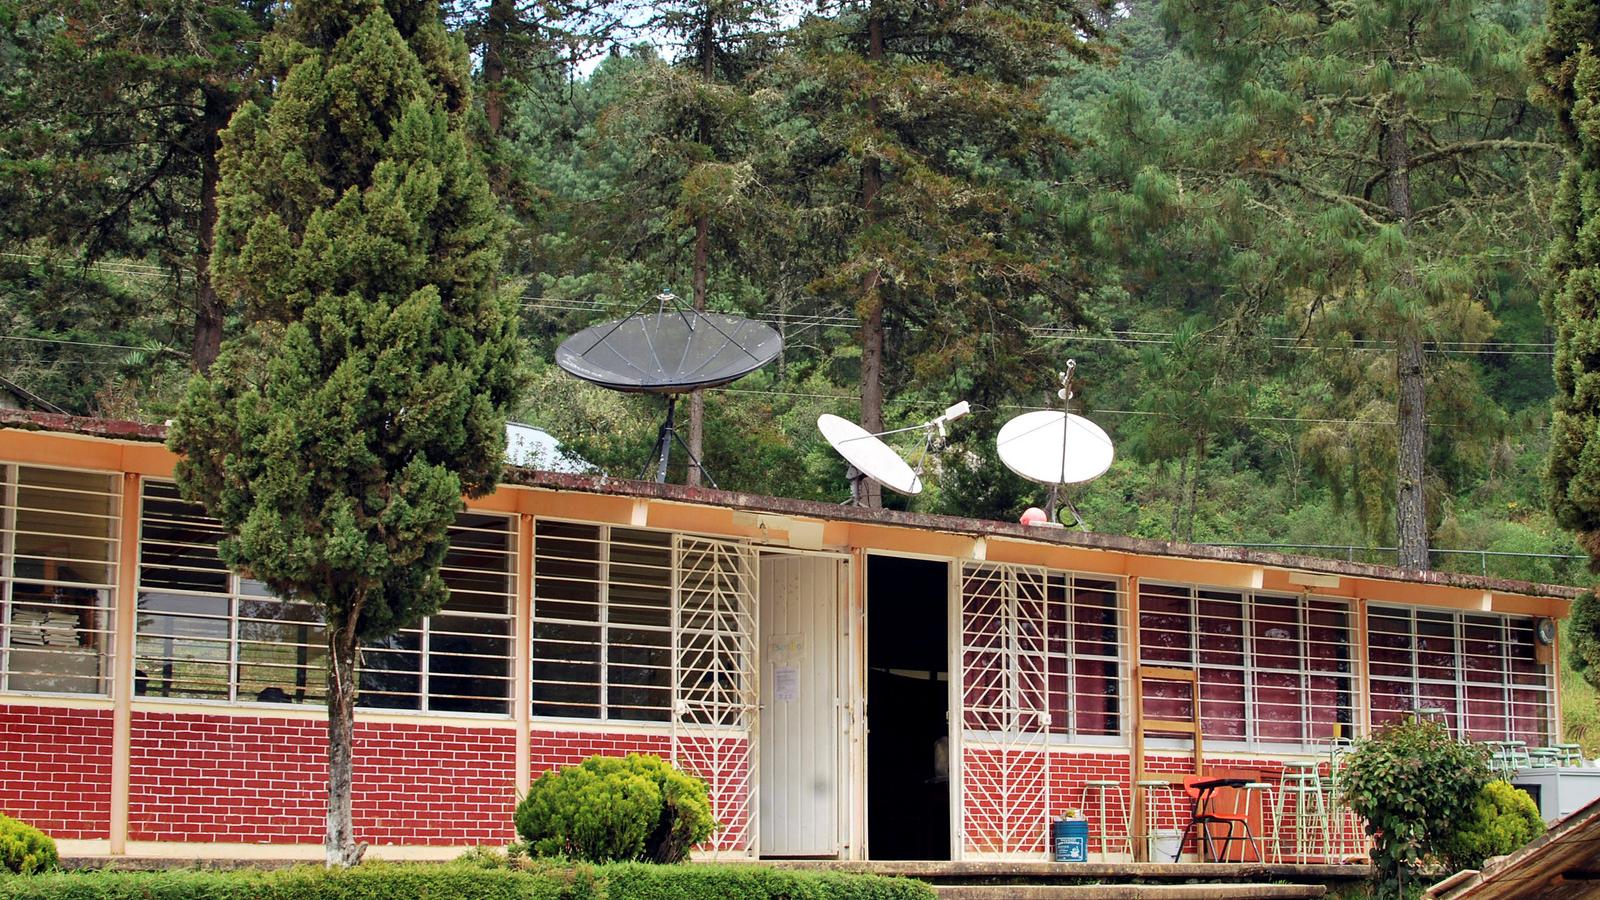 Satellites on the roof of a red brick school in Oaxaca state surrounded by green trees.